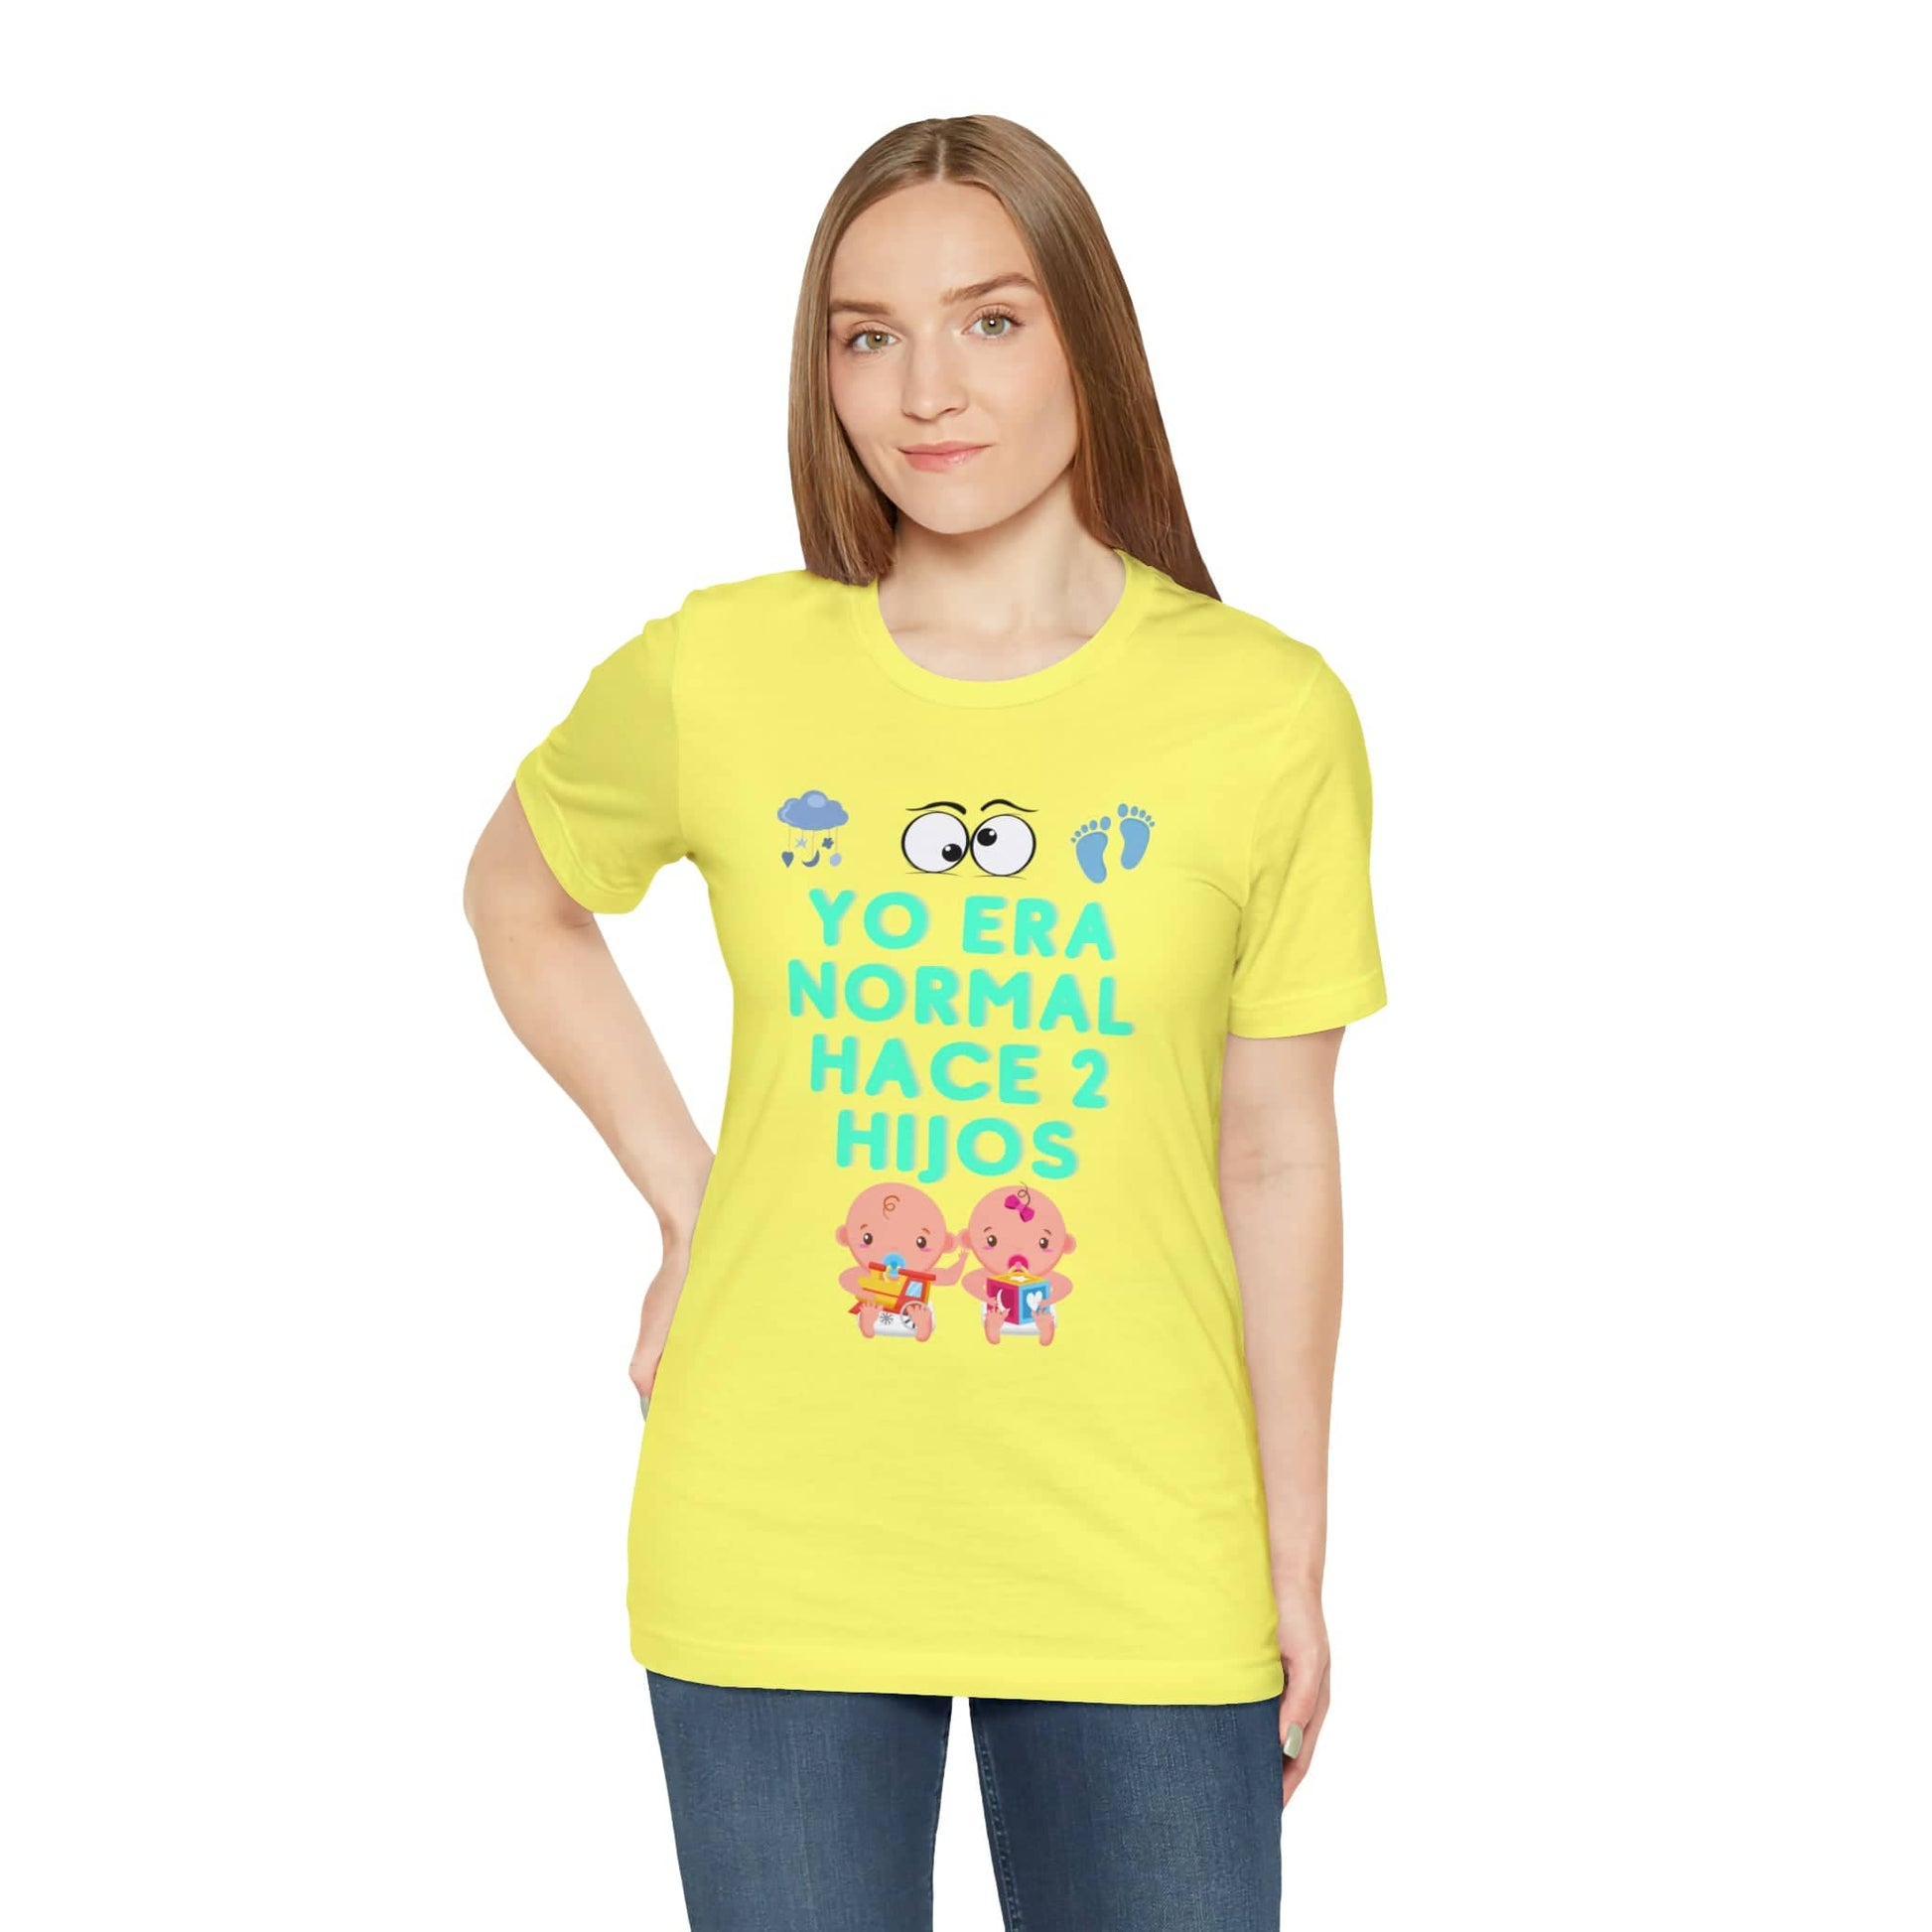 Yo Era Normal Hace 2 Hijos: The Perfect Unisex Tee for the Eternally Busy Parent T-Shirt Bigger Than Life Yellow S 